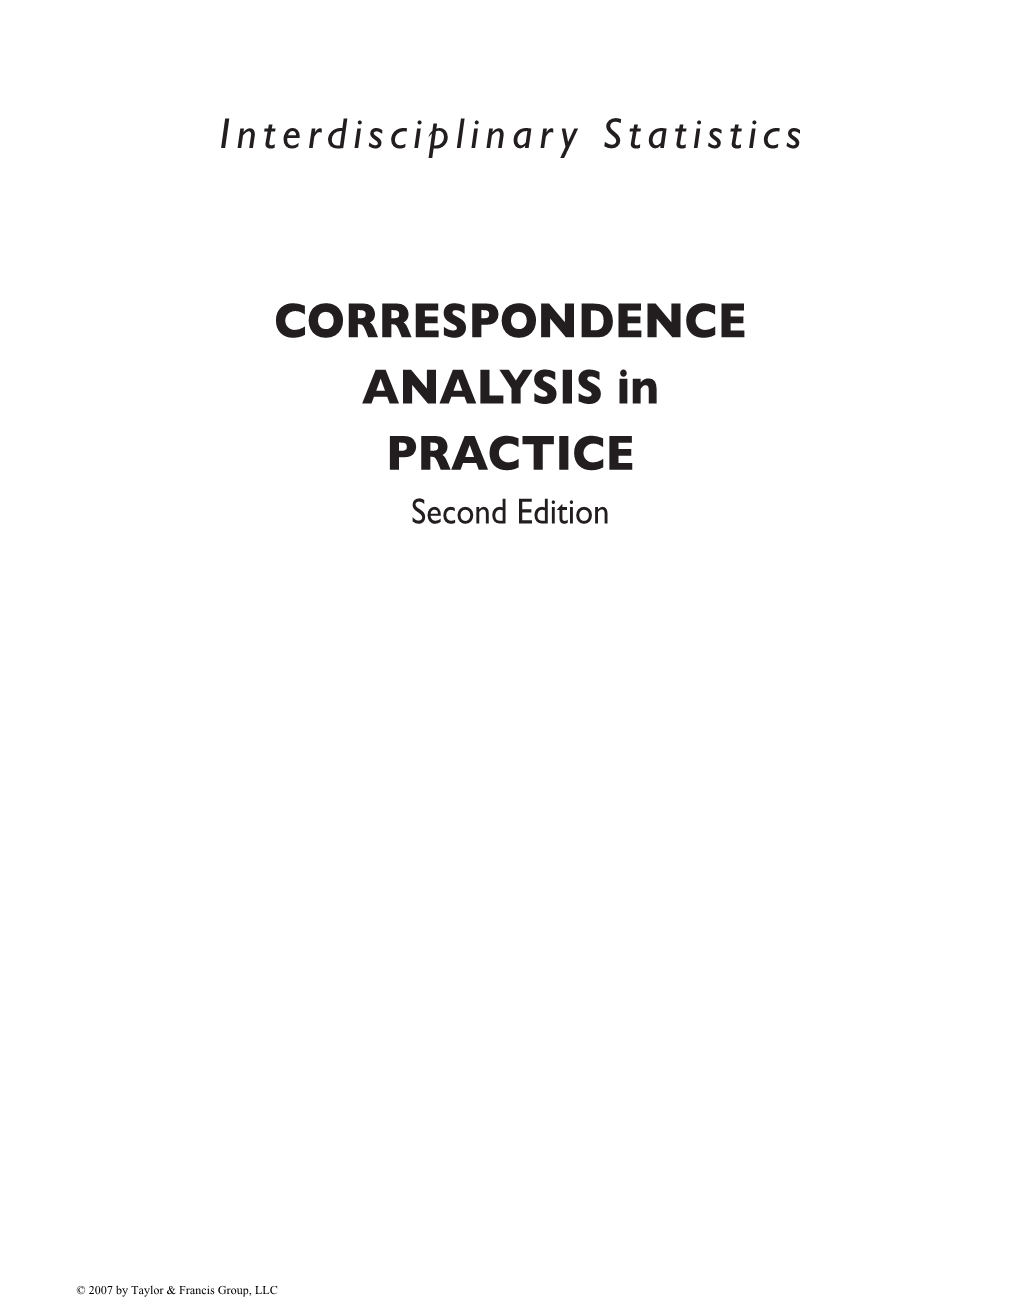 CORRESPONDENCE ANALYSIS in PRACTICE Second Edition